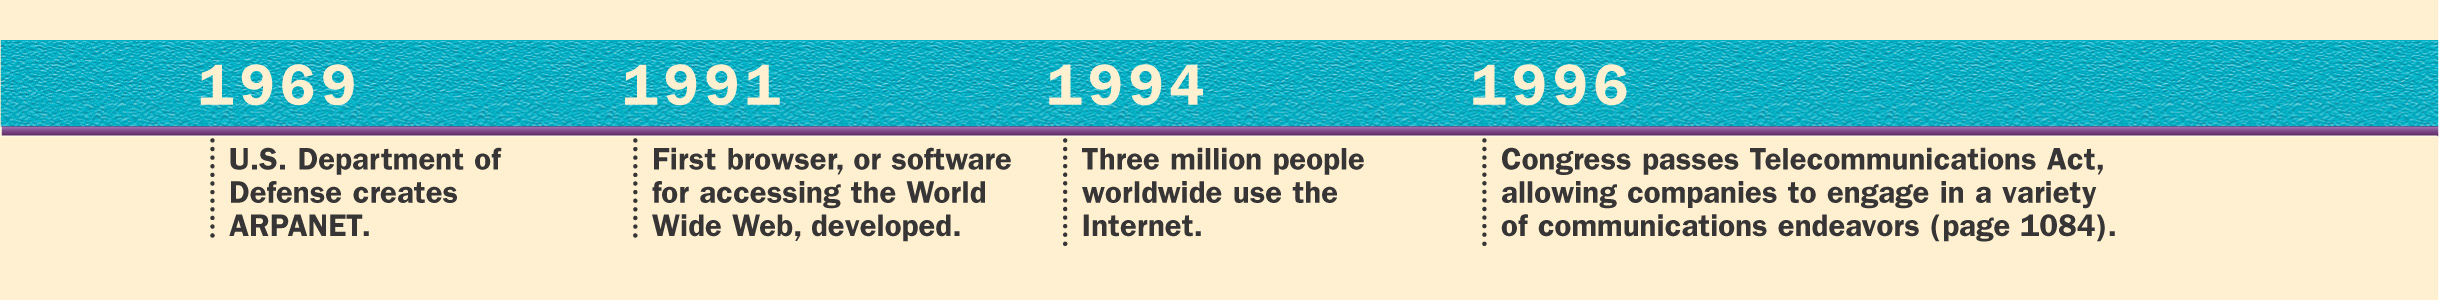 A timeline shows advances in Communications in the U.S. from 1969 to 2006.